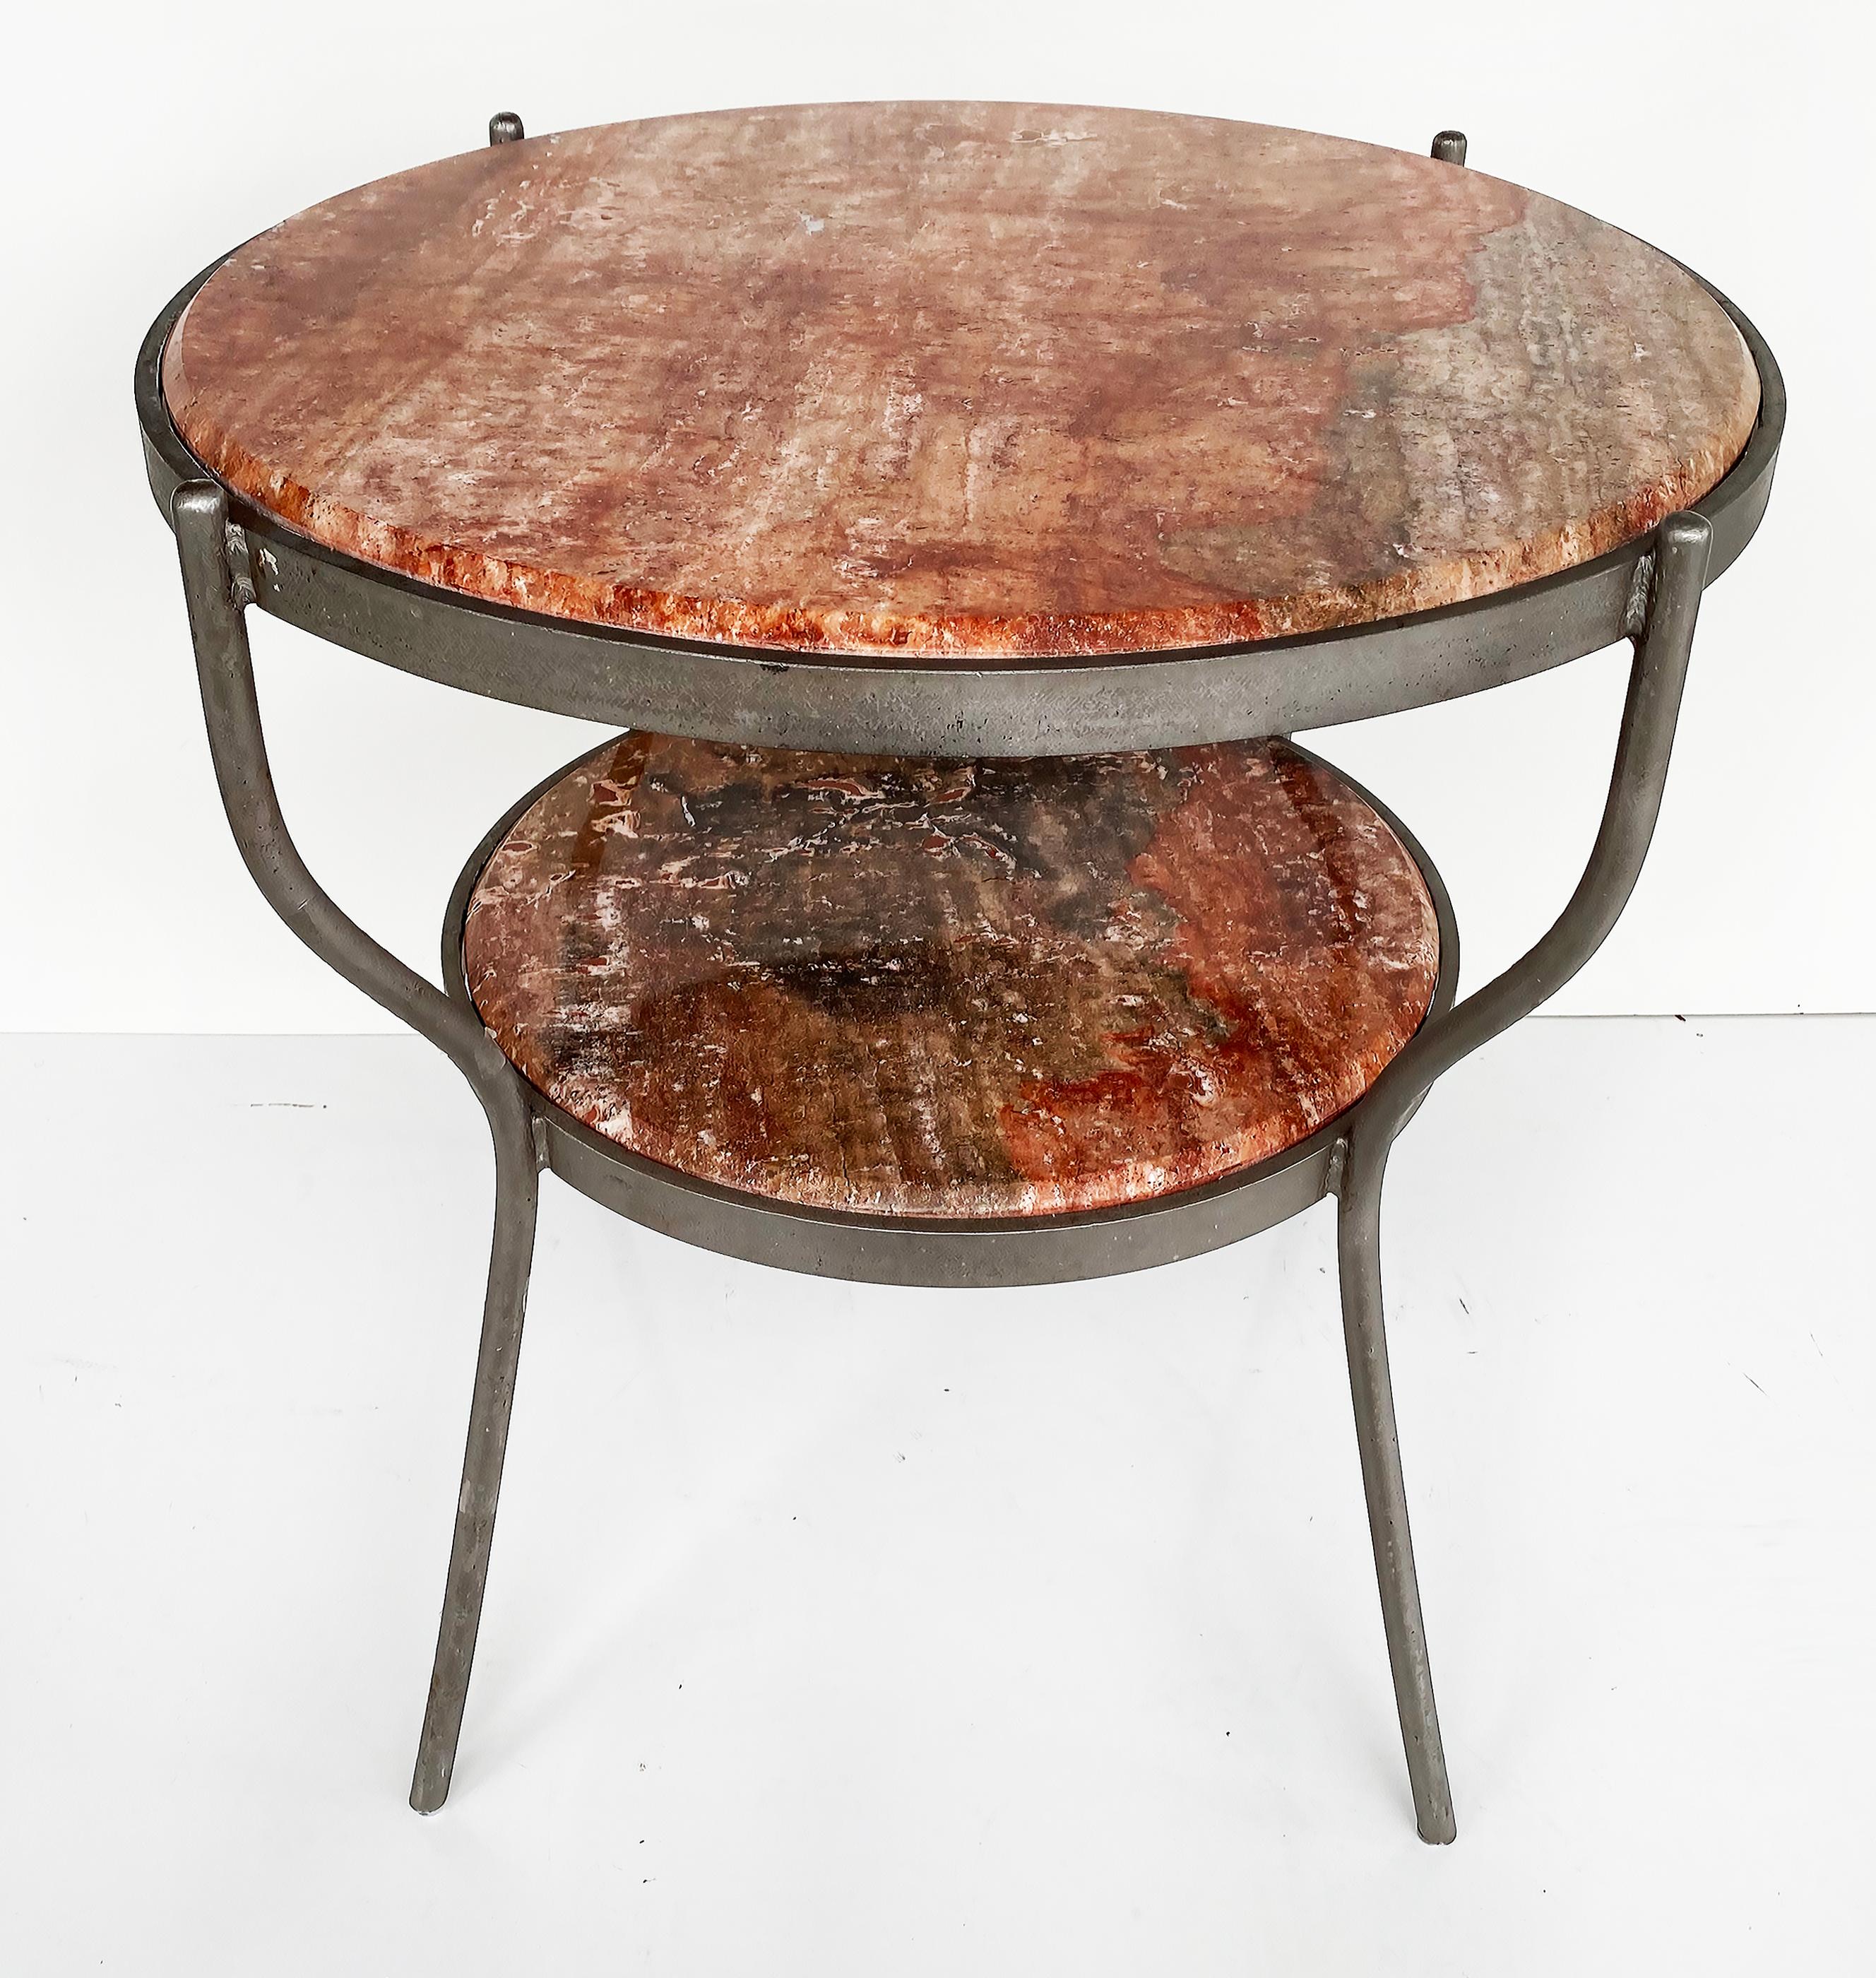 Vintage Industrial 2-Tier Metal Frame Marble Top Side Tables, Pair

Offered for sale is a pair of industrial-style two-tiered round marble side tables supported by metal frames. These vintage tables have round inset marble tops with shelves below.